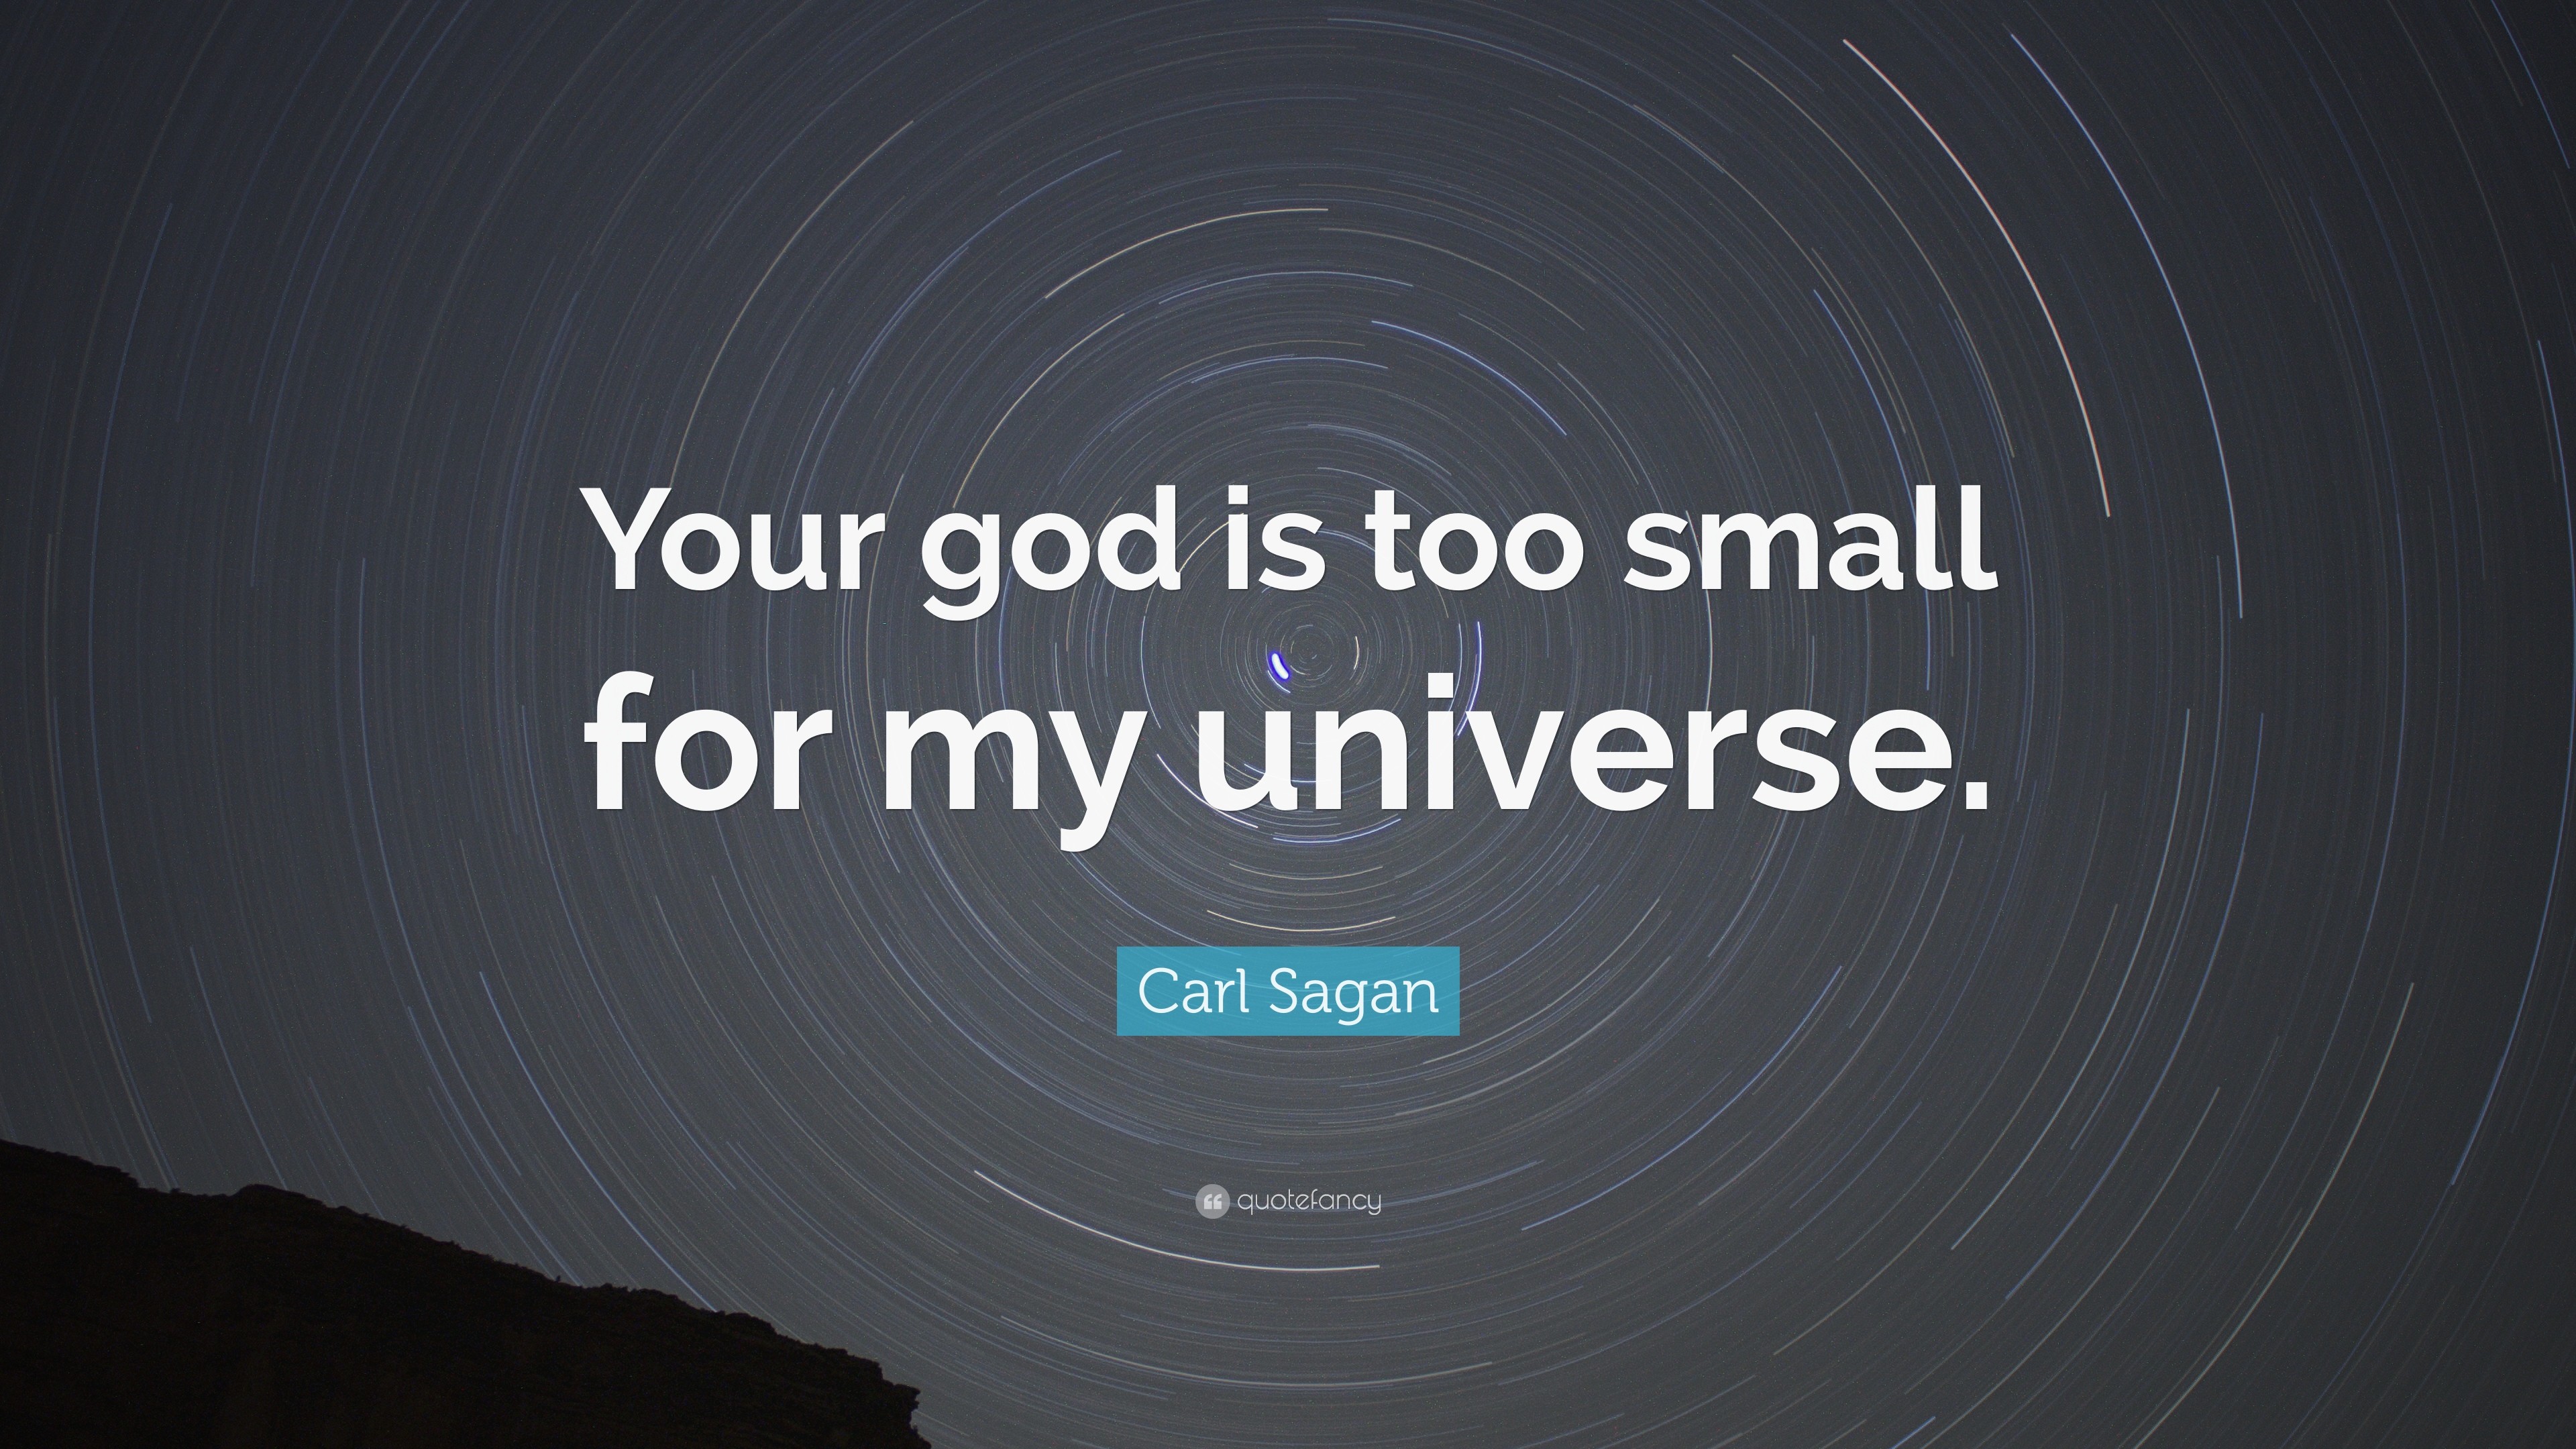 3840x2160 Carl Sagan Quote: “Your god is too small for my universe.”